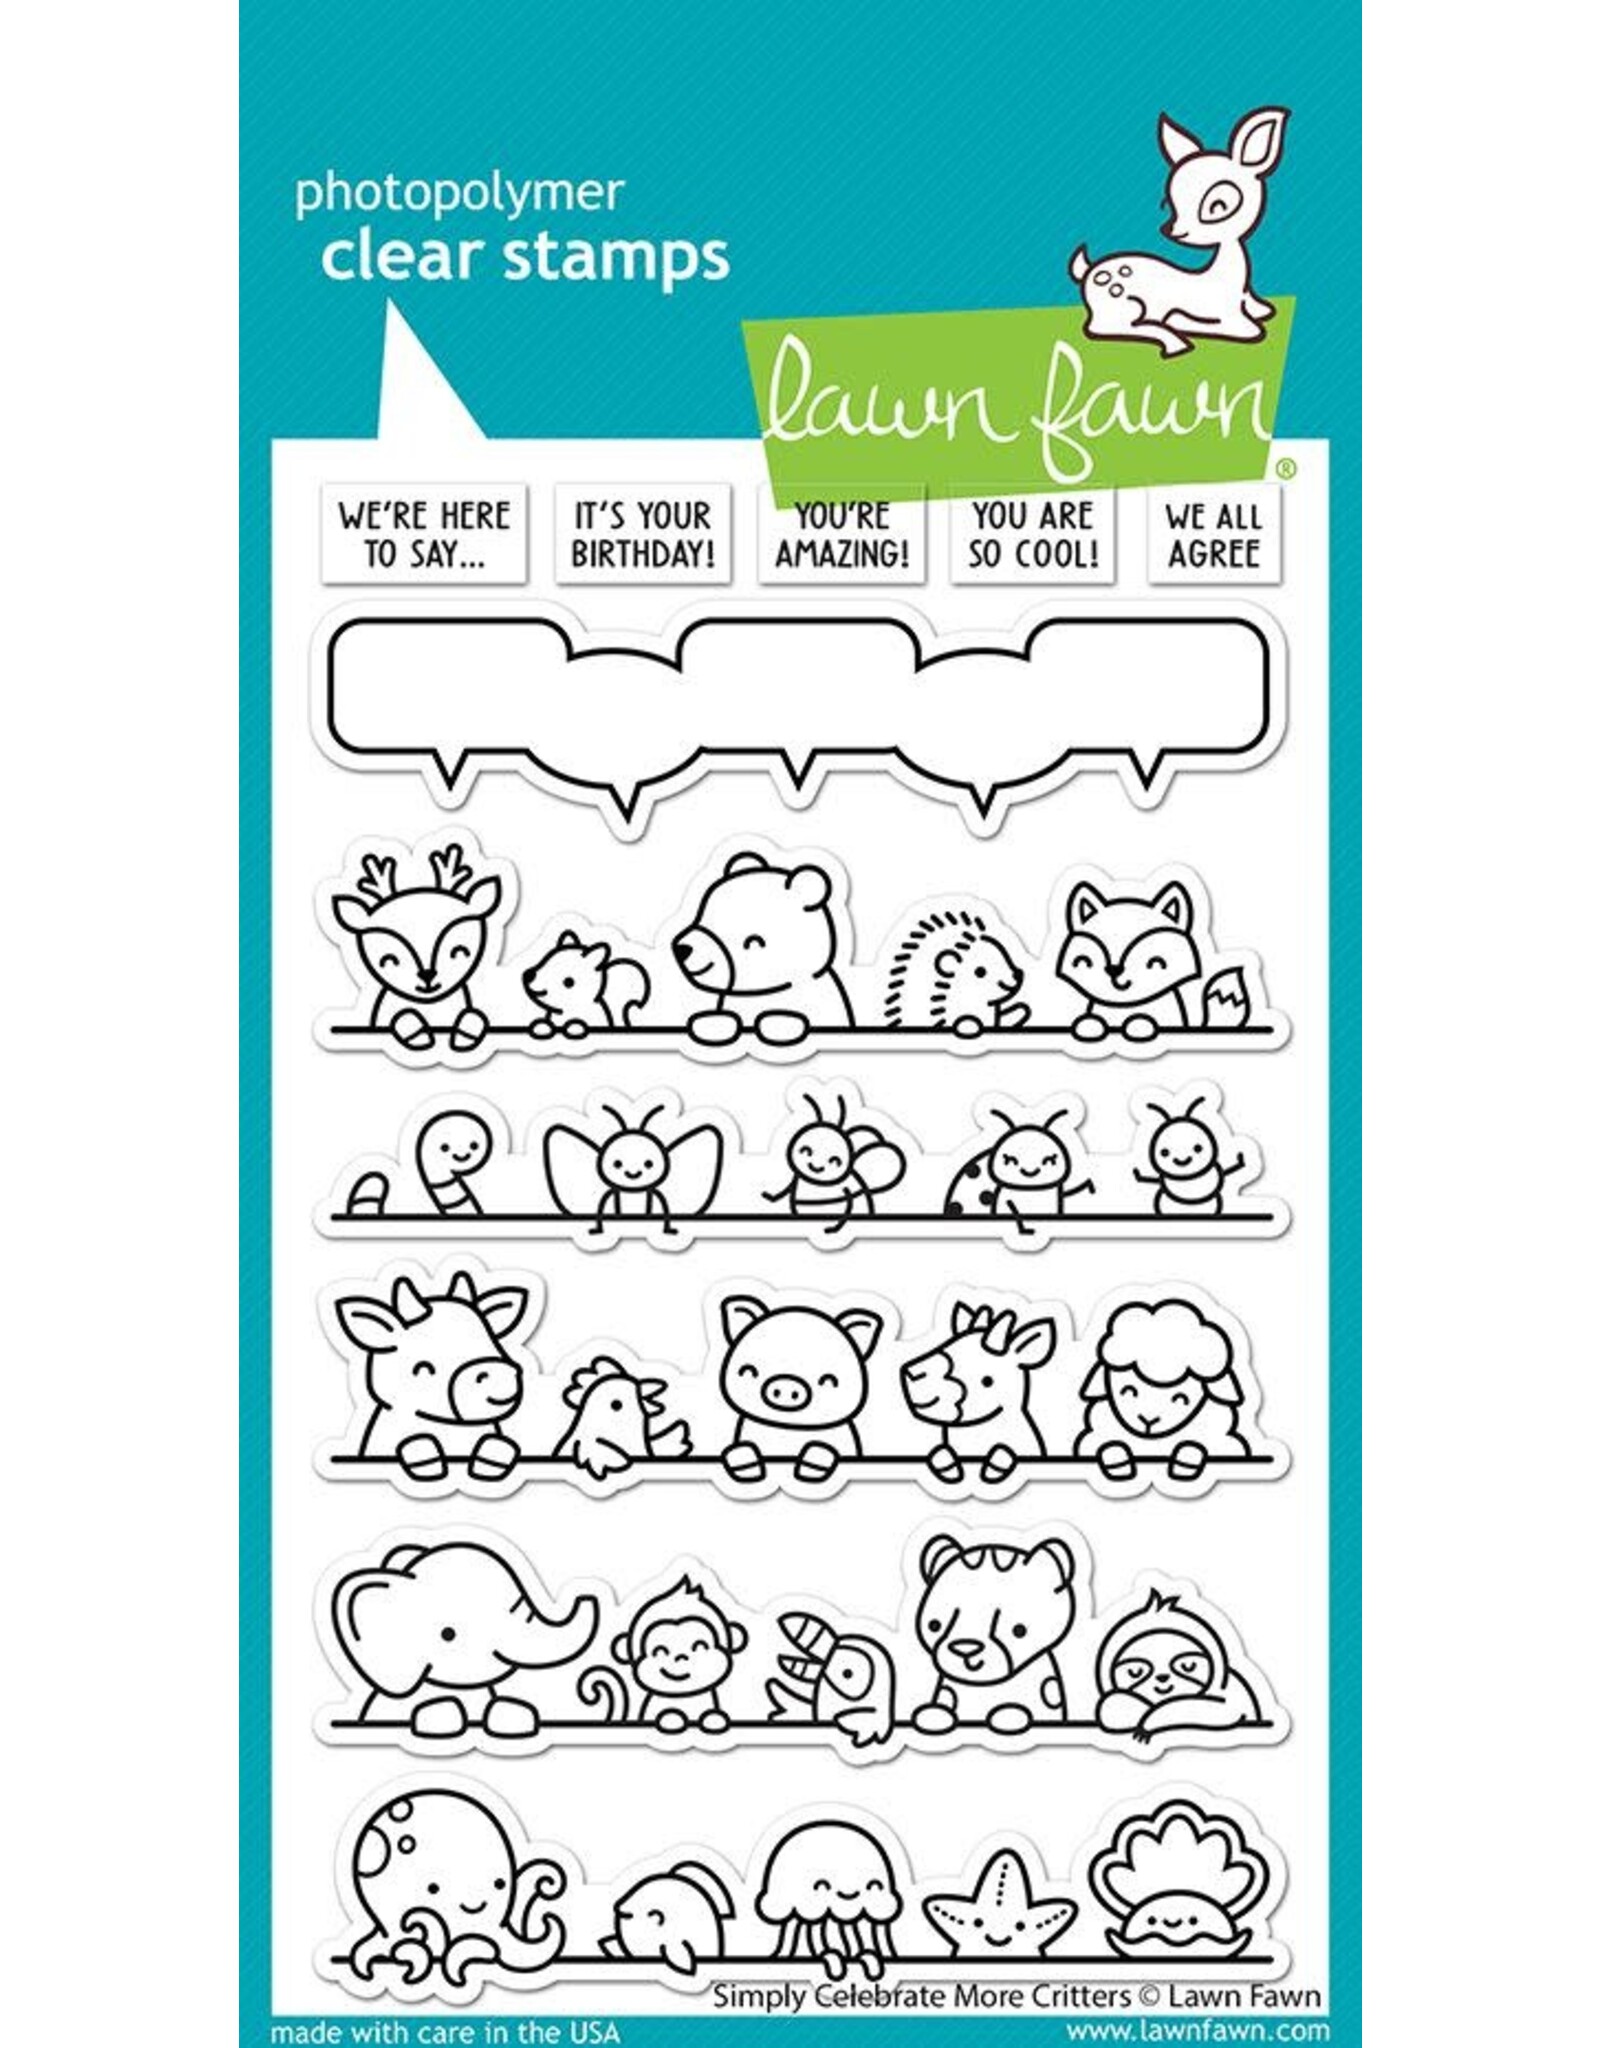 Lawn Fawn Smply Celebrate More Critters - Clear Stamps